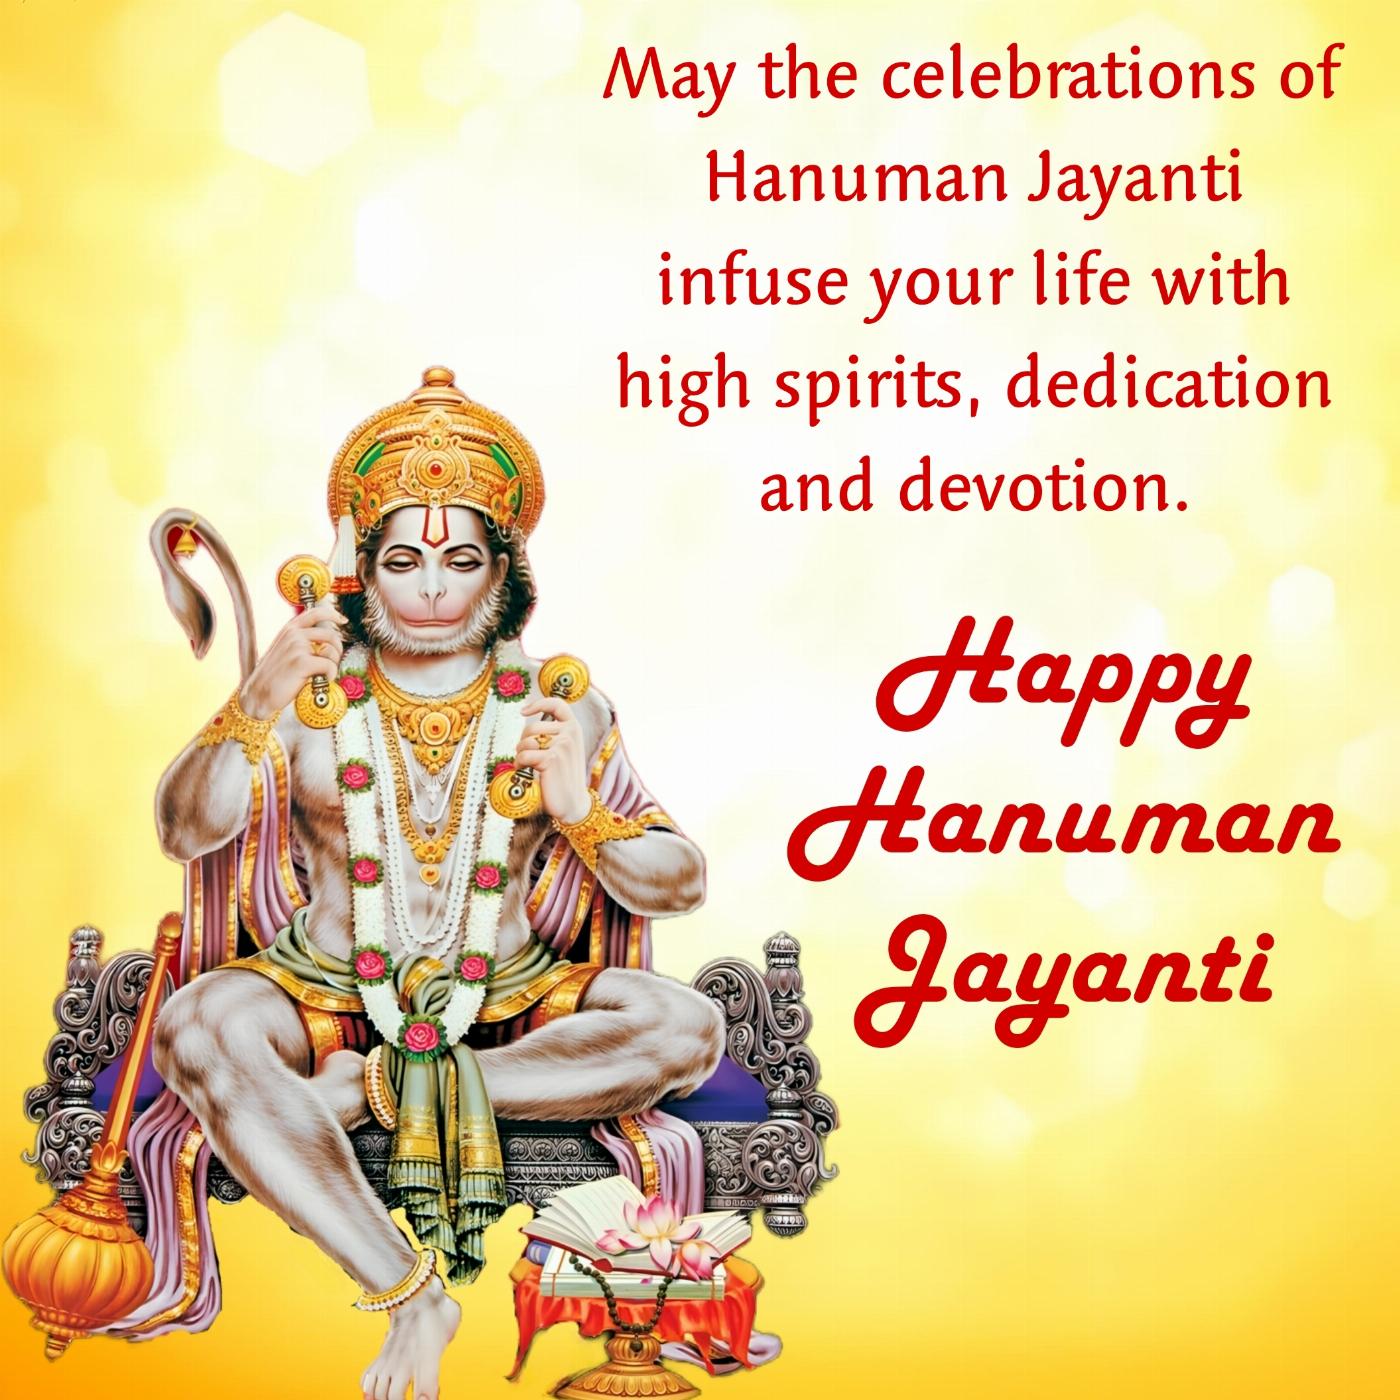 May the celebrations of Hanuman Jayanti infuse your life